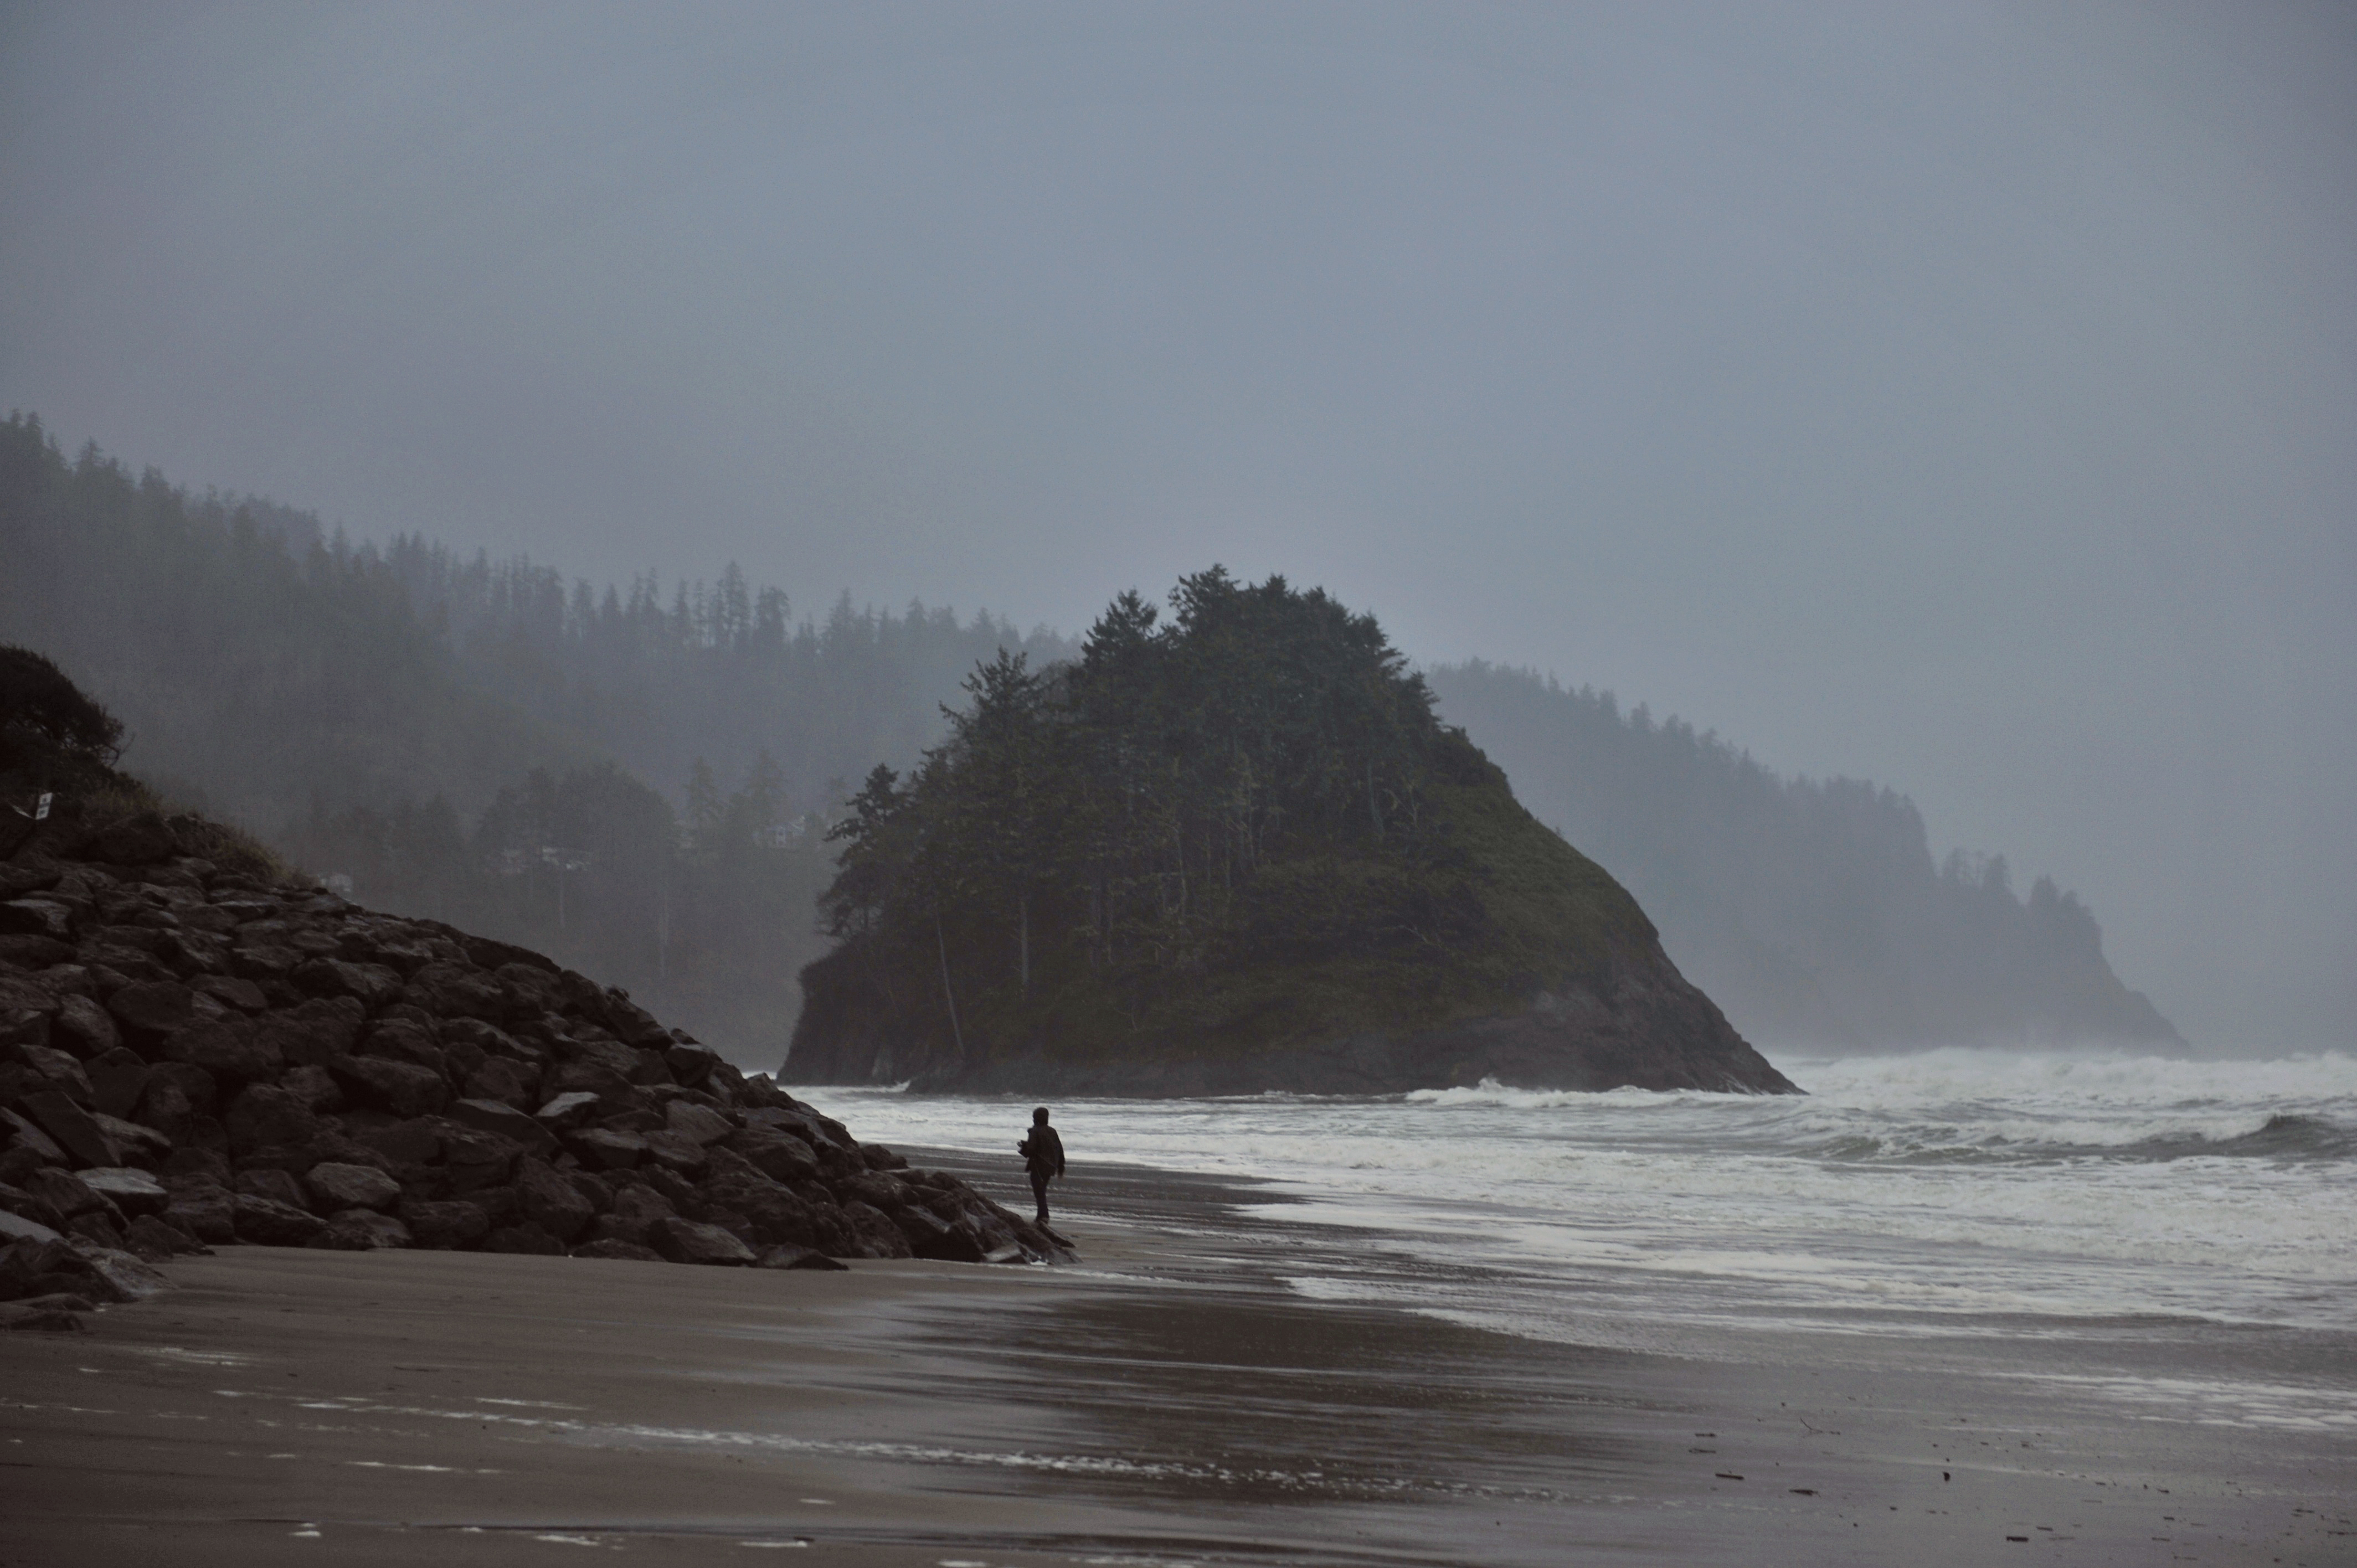 One person as a figure walking along a dark beach with trees and mountains in the background.